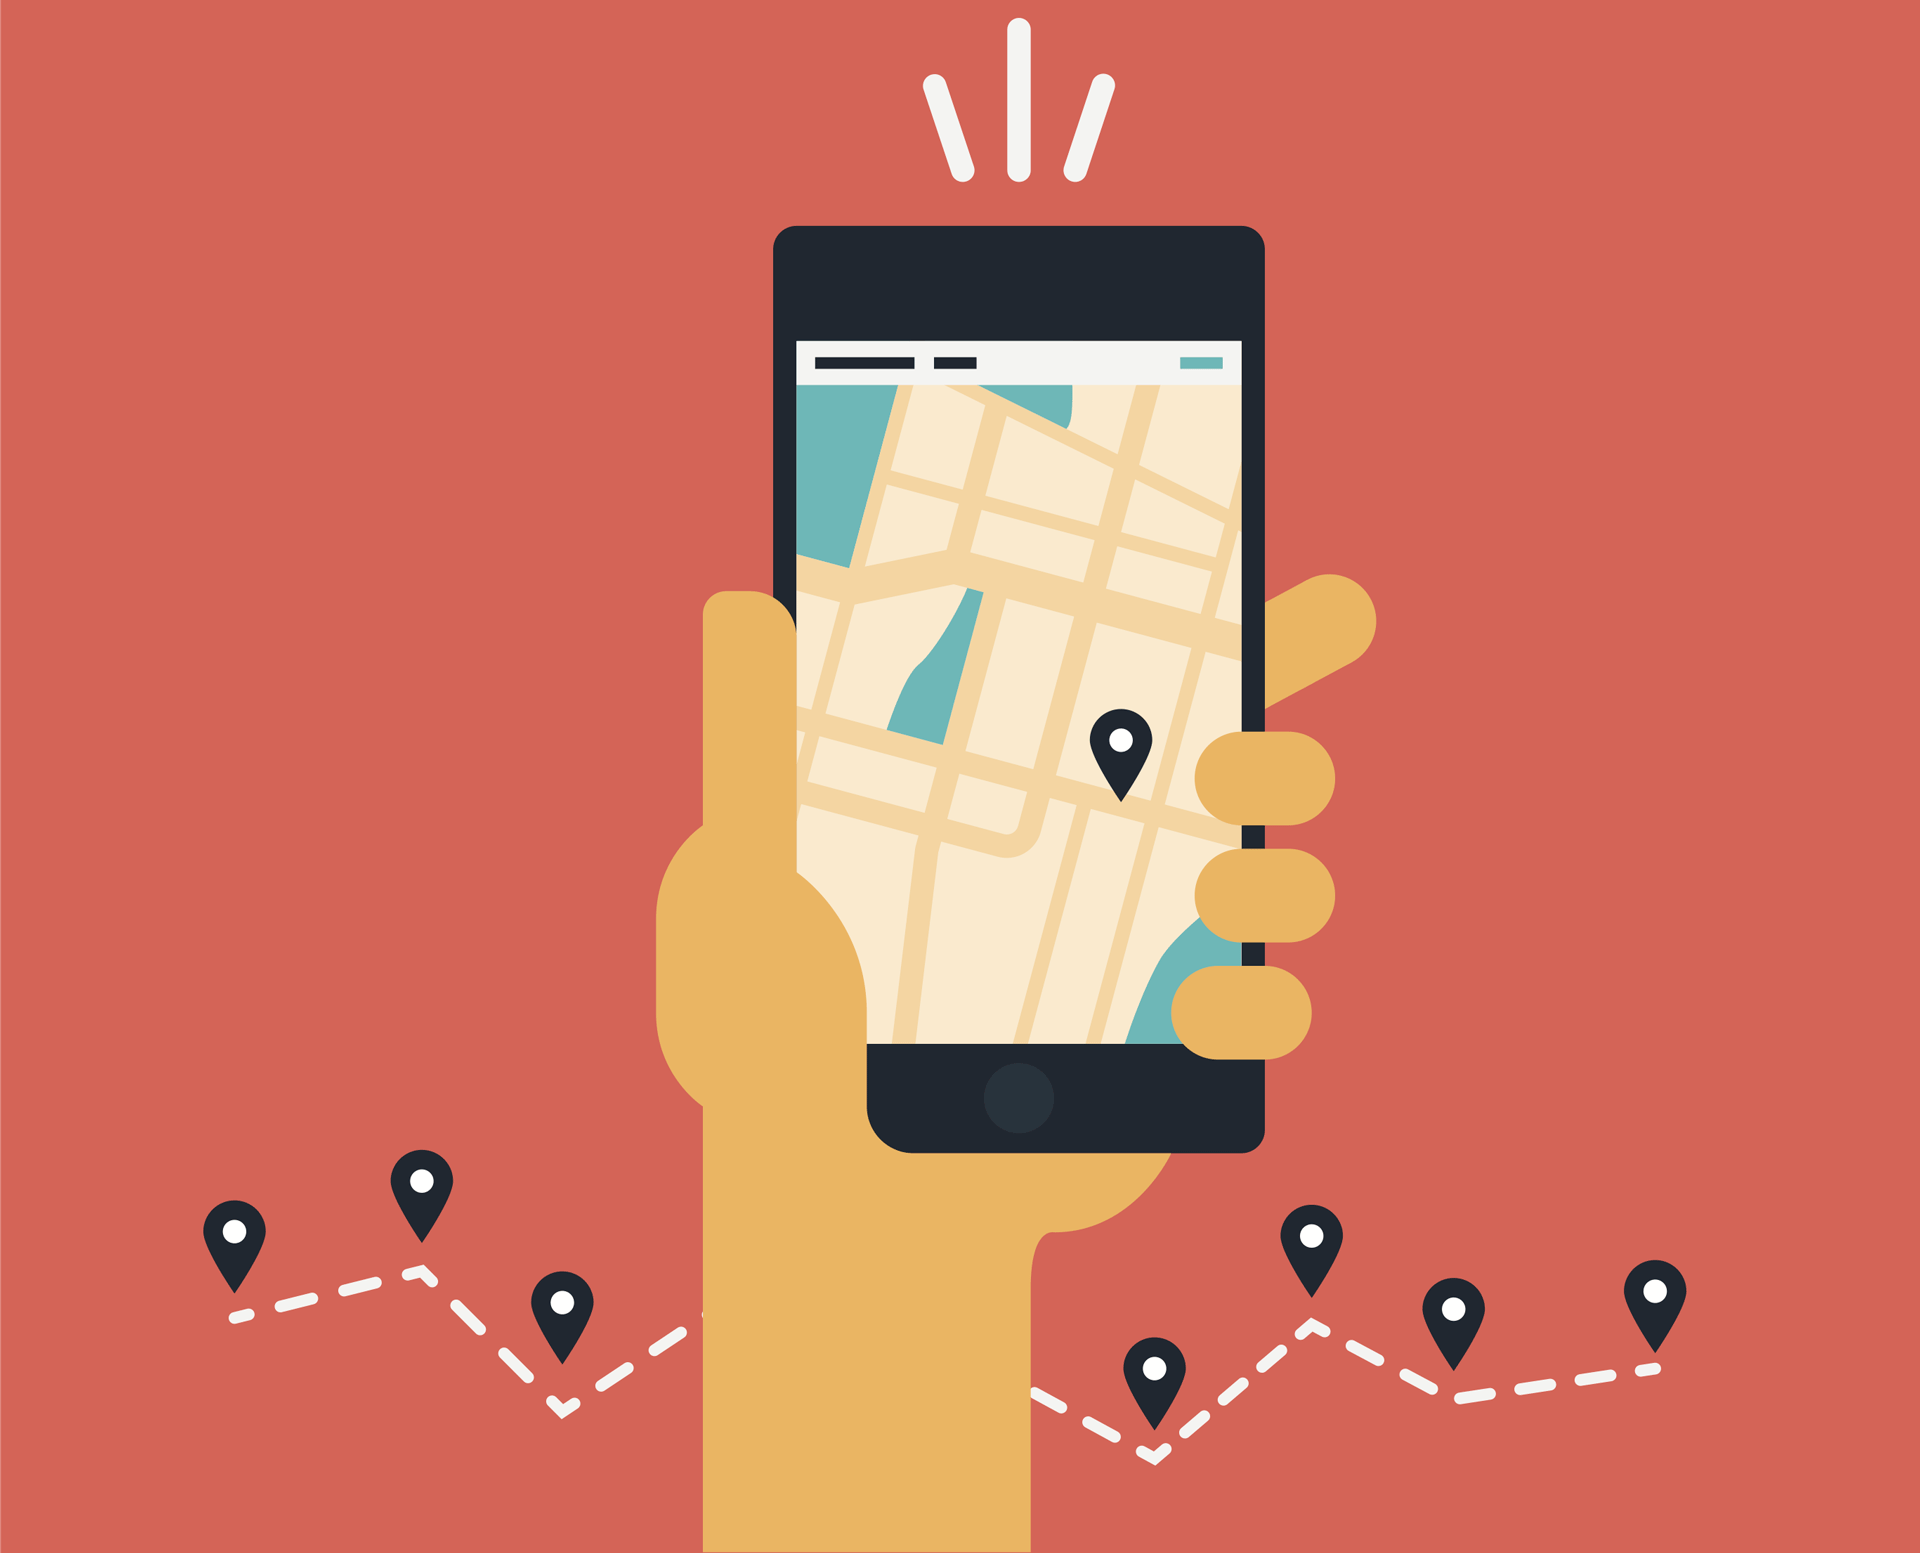 Learn 3 easiest ways to track someone’s location on iPhone